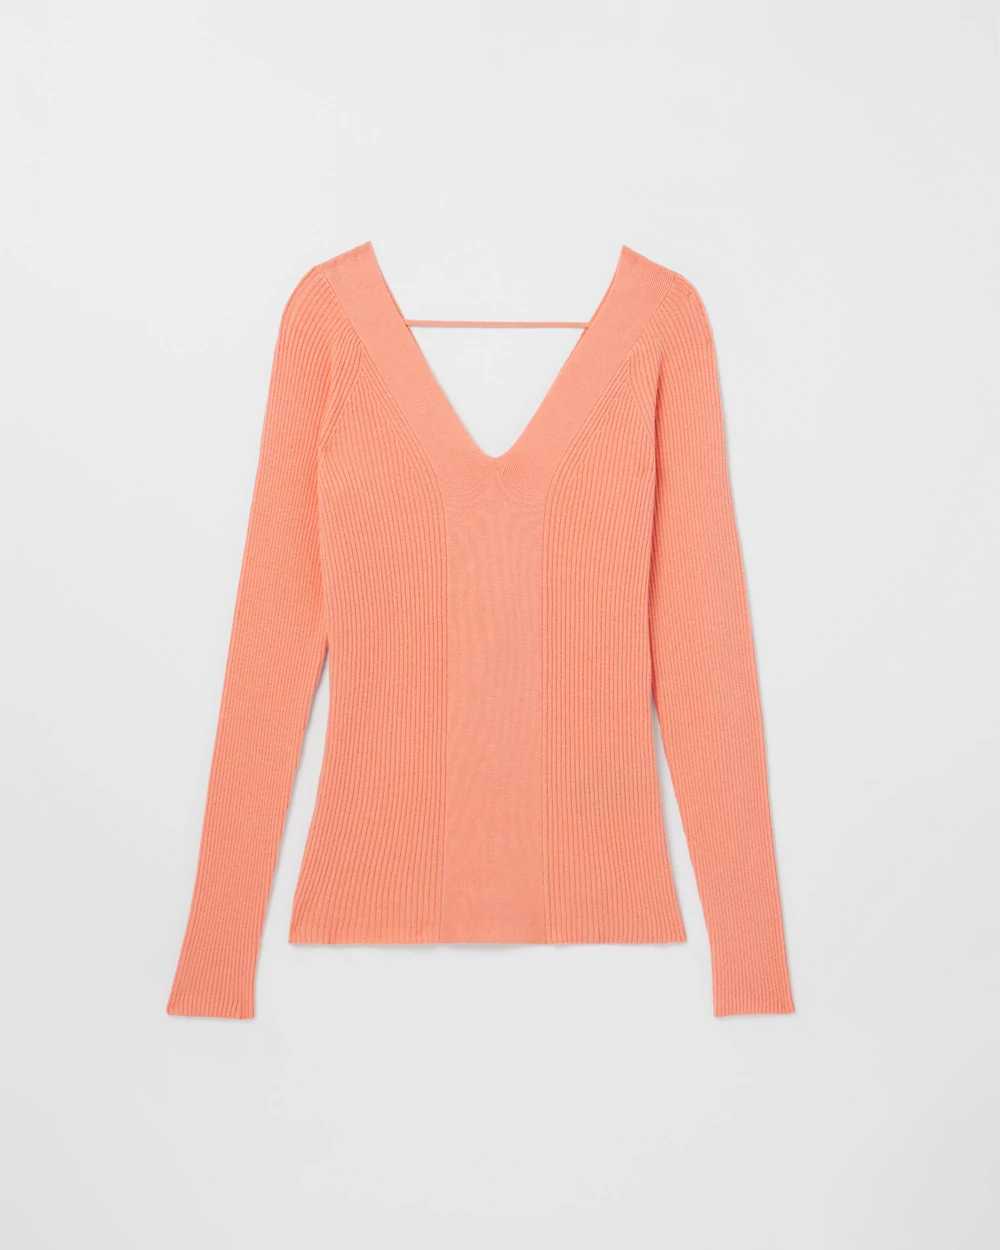 Long Sleeve Ribbed Twist Back Sweater click to view larger image.